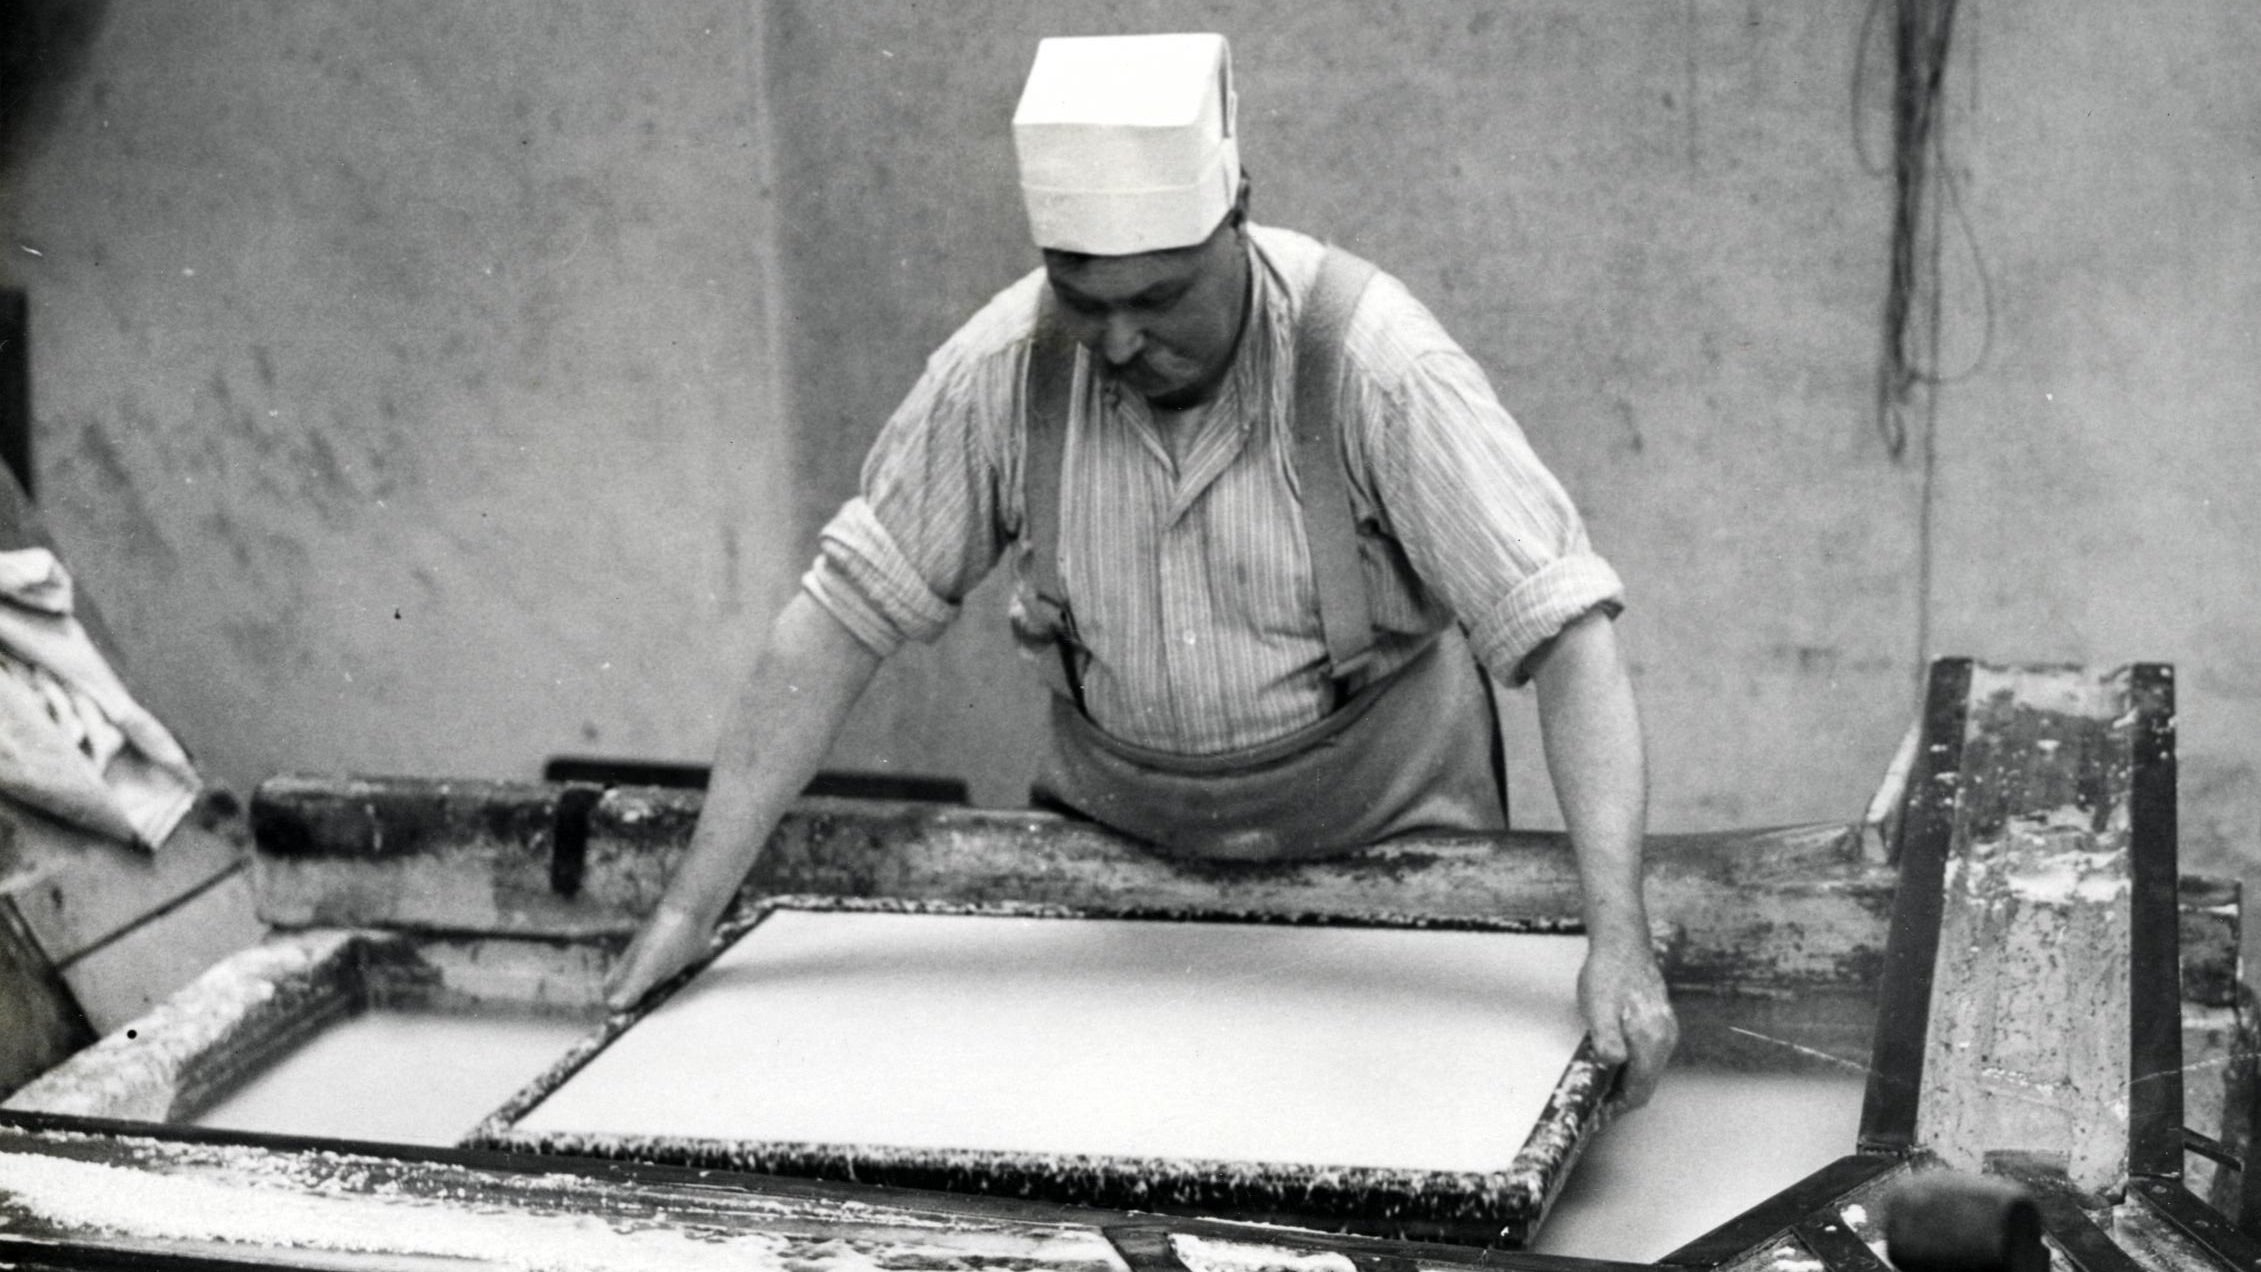 A vat man making paper in the mid-20th century.